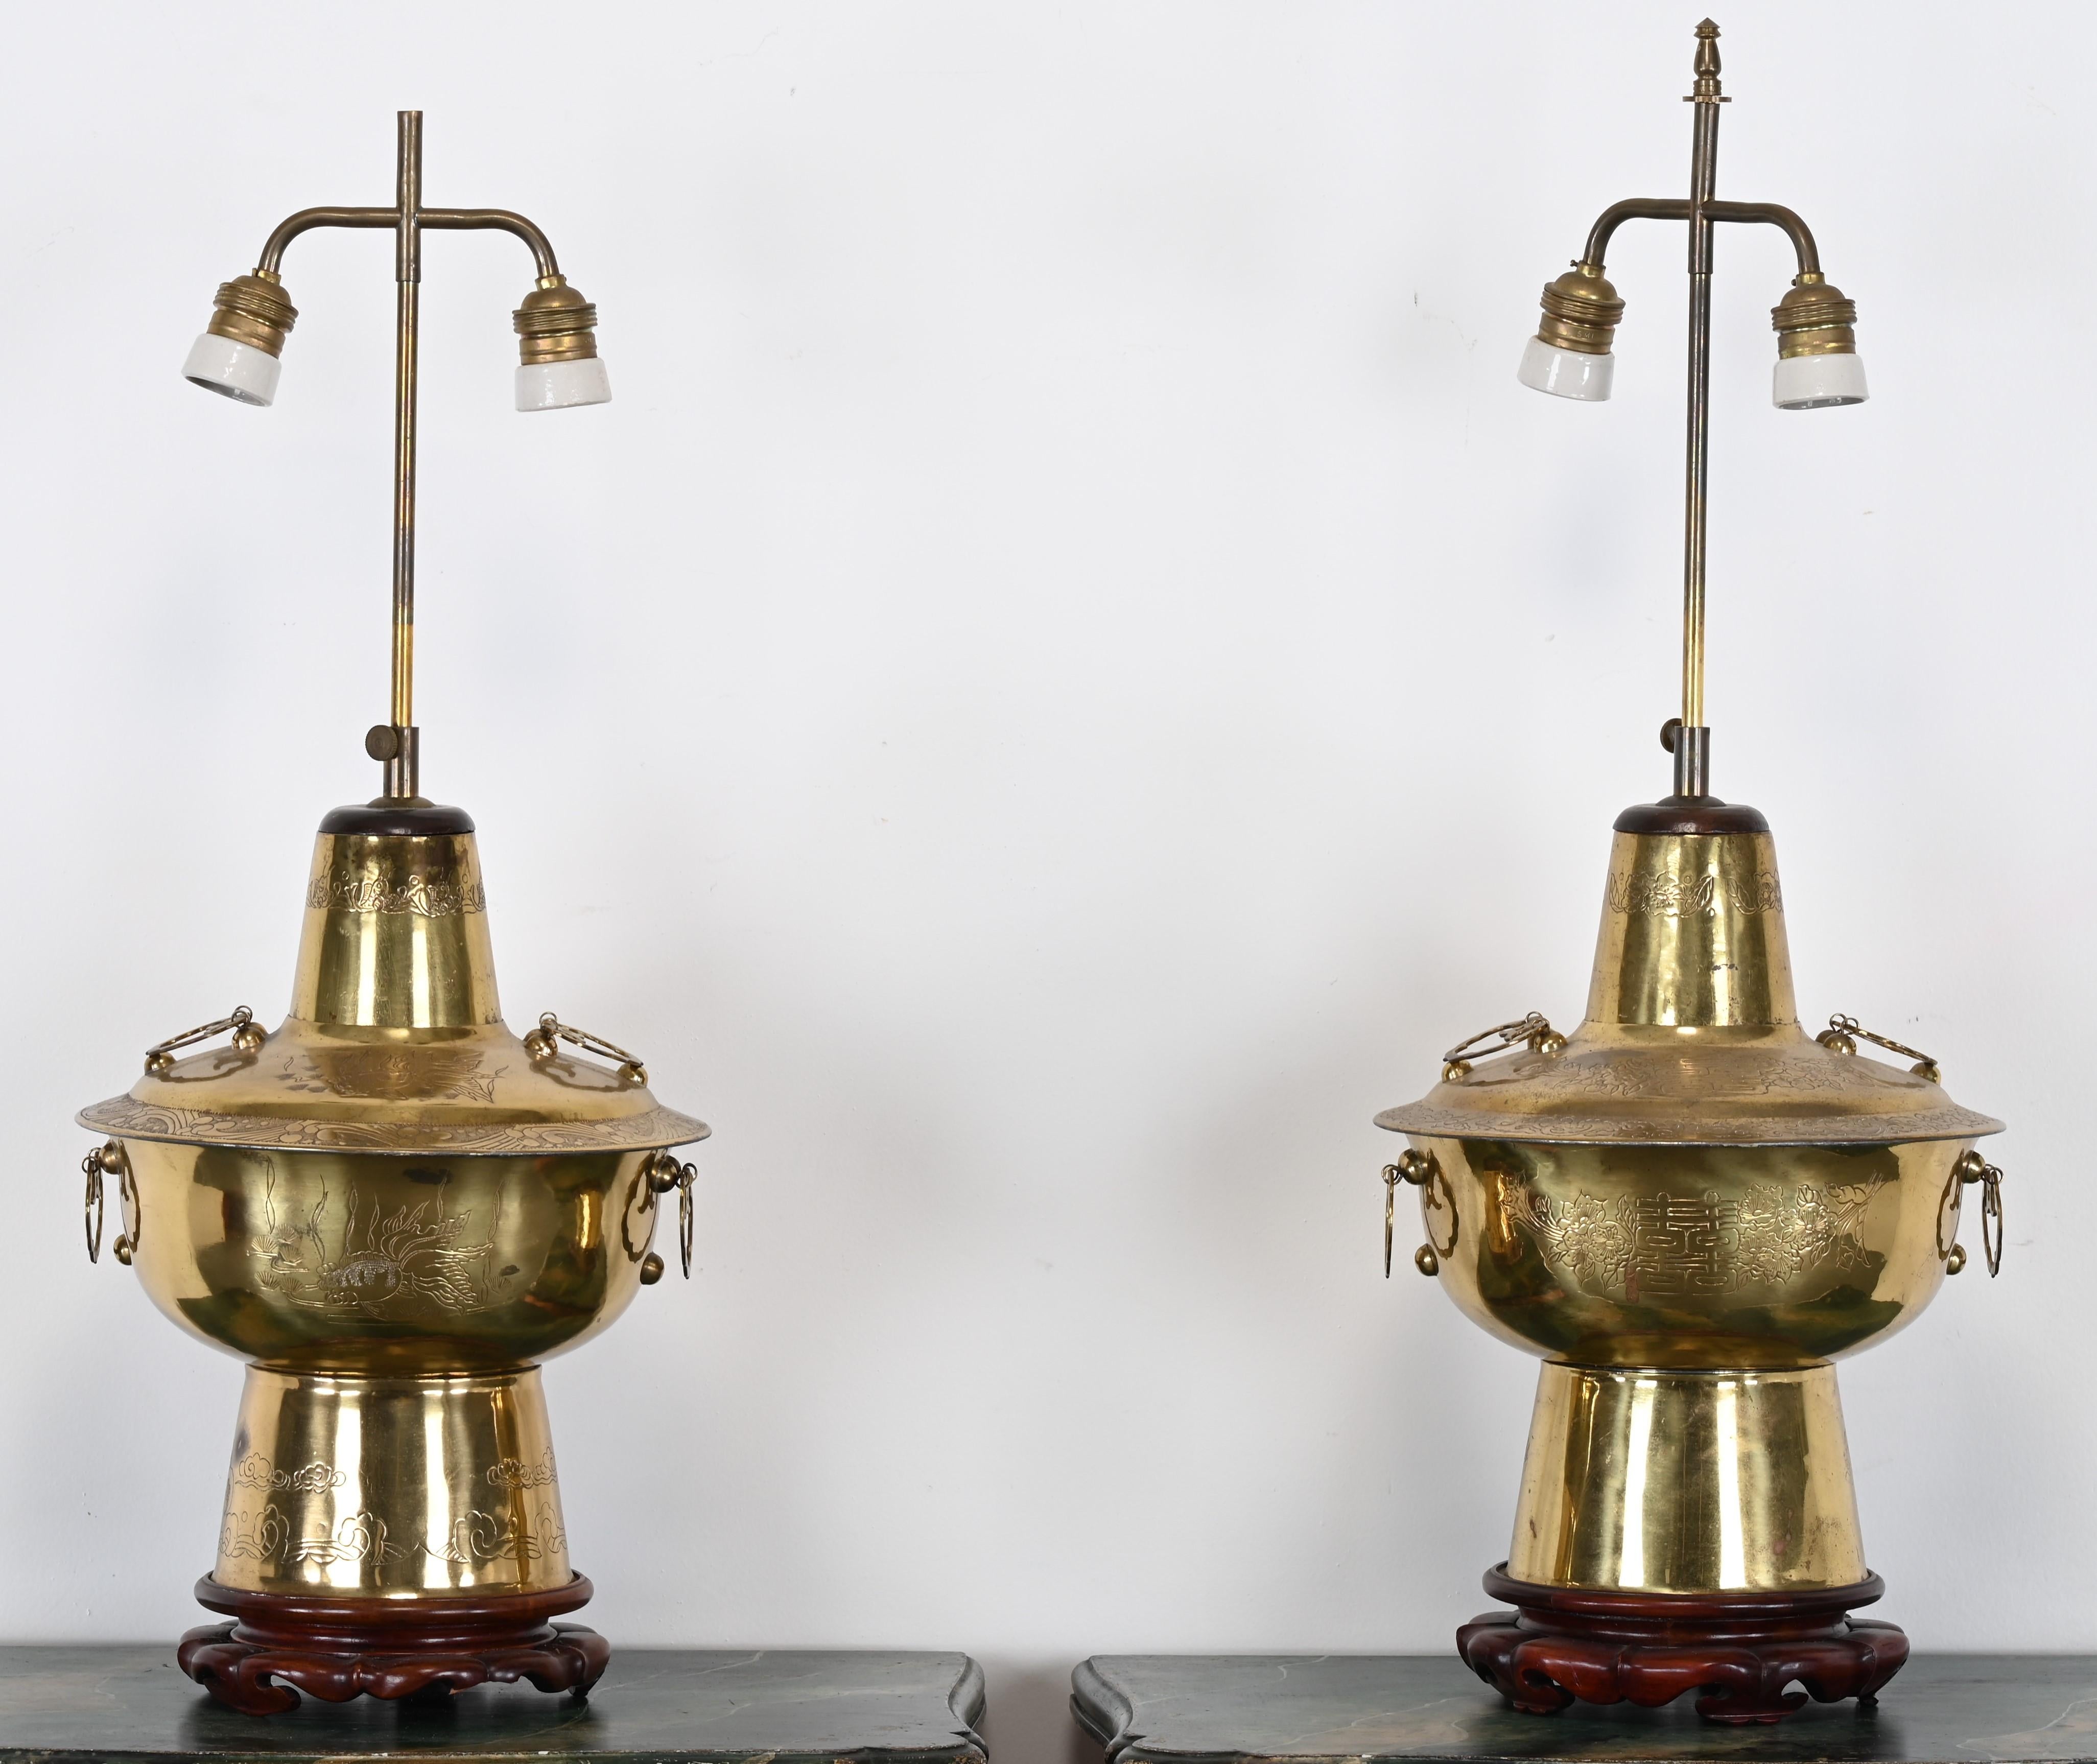 A stunning pair of mid-century Asian Style solid brass lamps with handsome wood bases. Pierced designs and etched accents on brass. Would look great in any Asian style, antique, or modern style setting. Great decorator-style! Good condition with